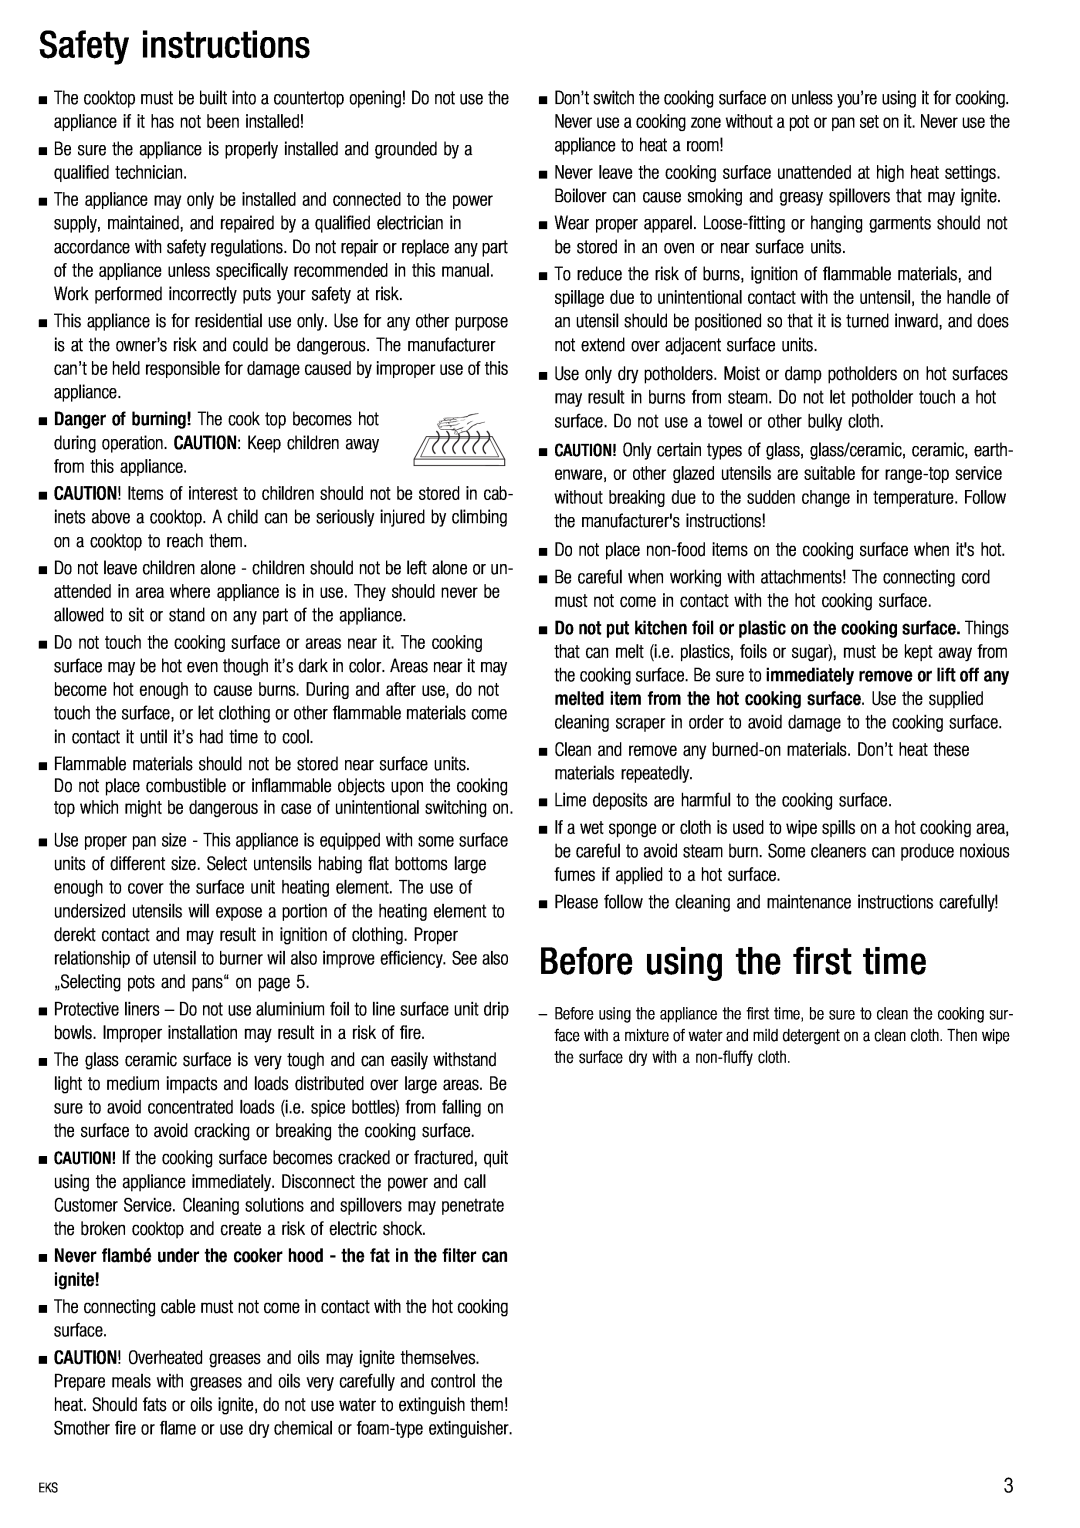 Kuppersbusch USA EKS 604.2, EKS 804.2 manual Safety instructions, Before using the first time 